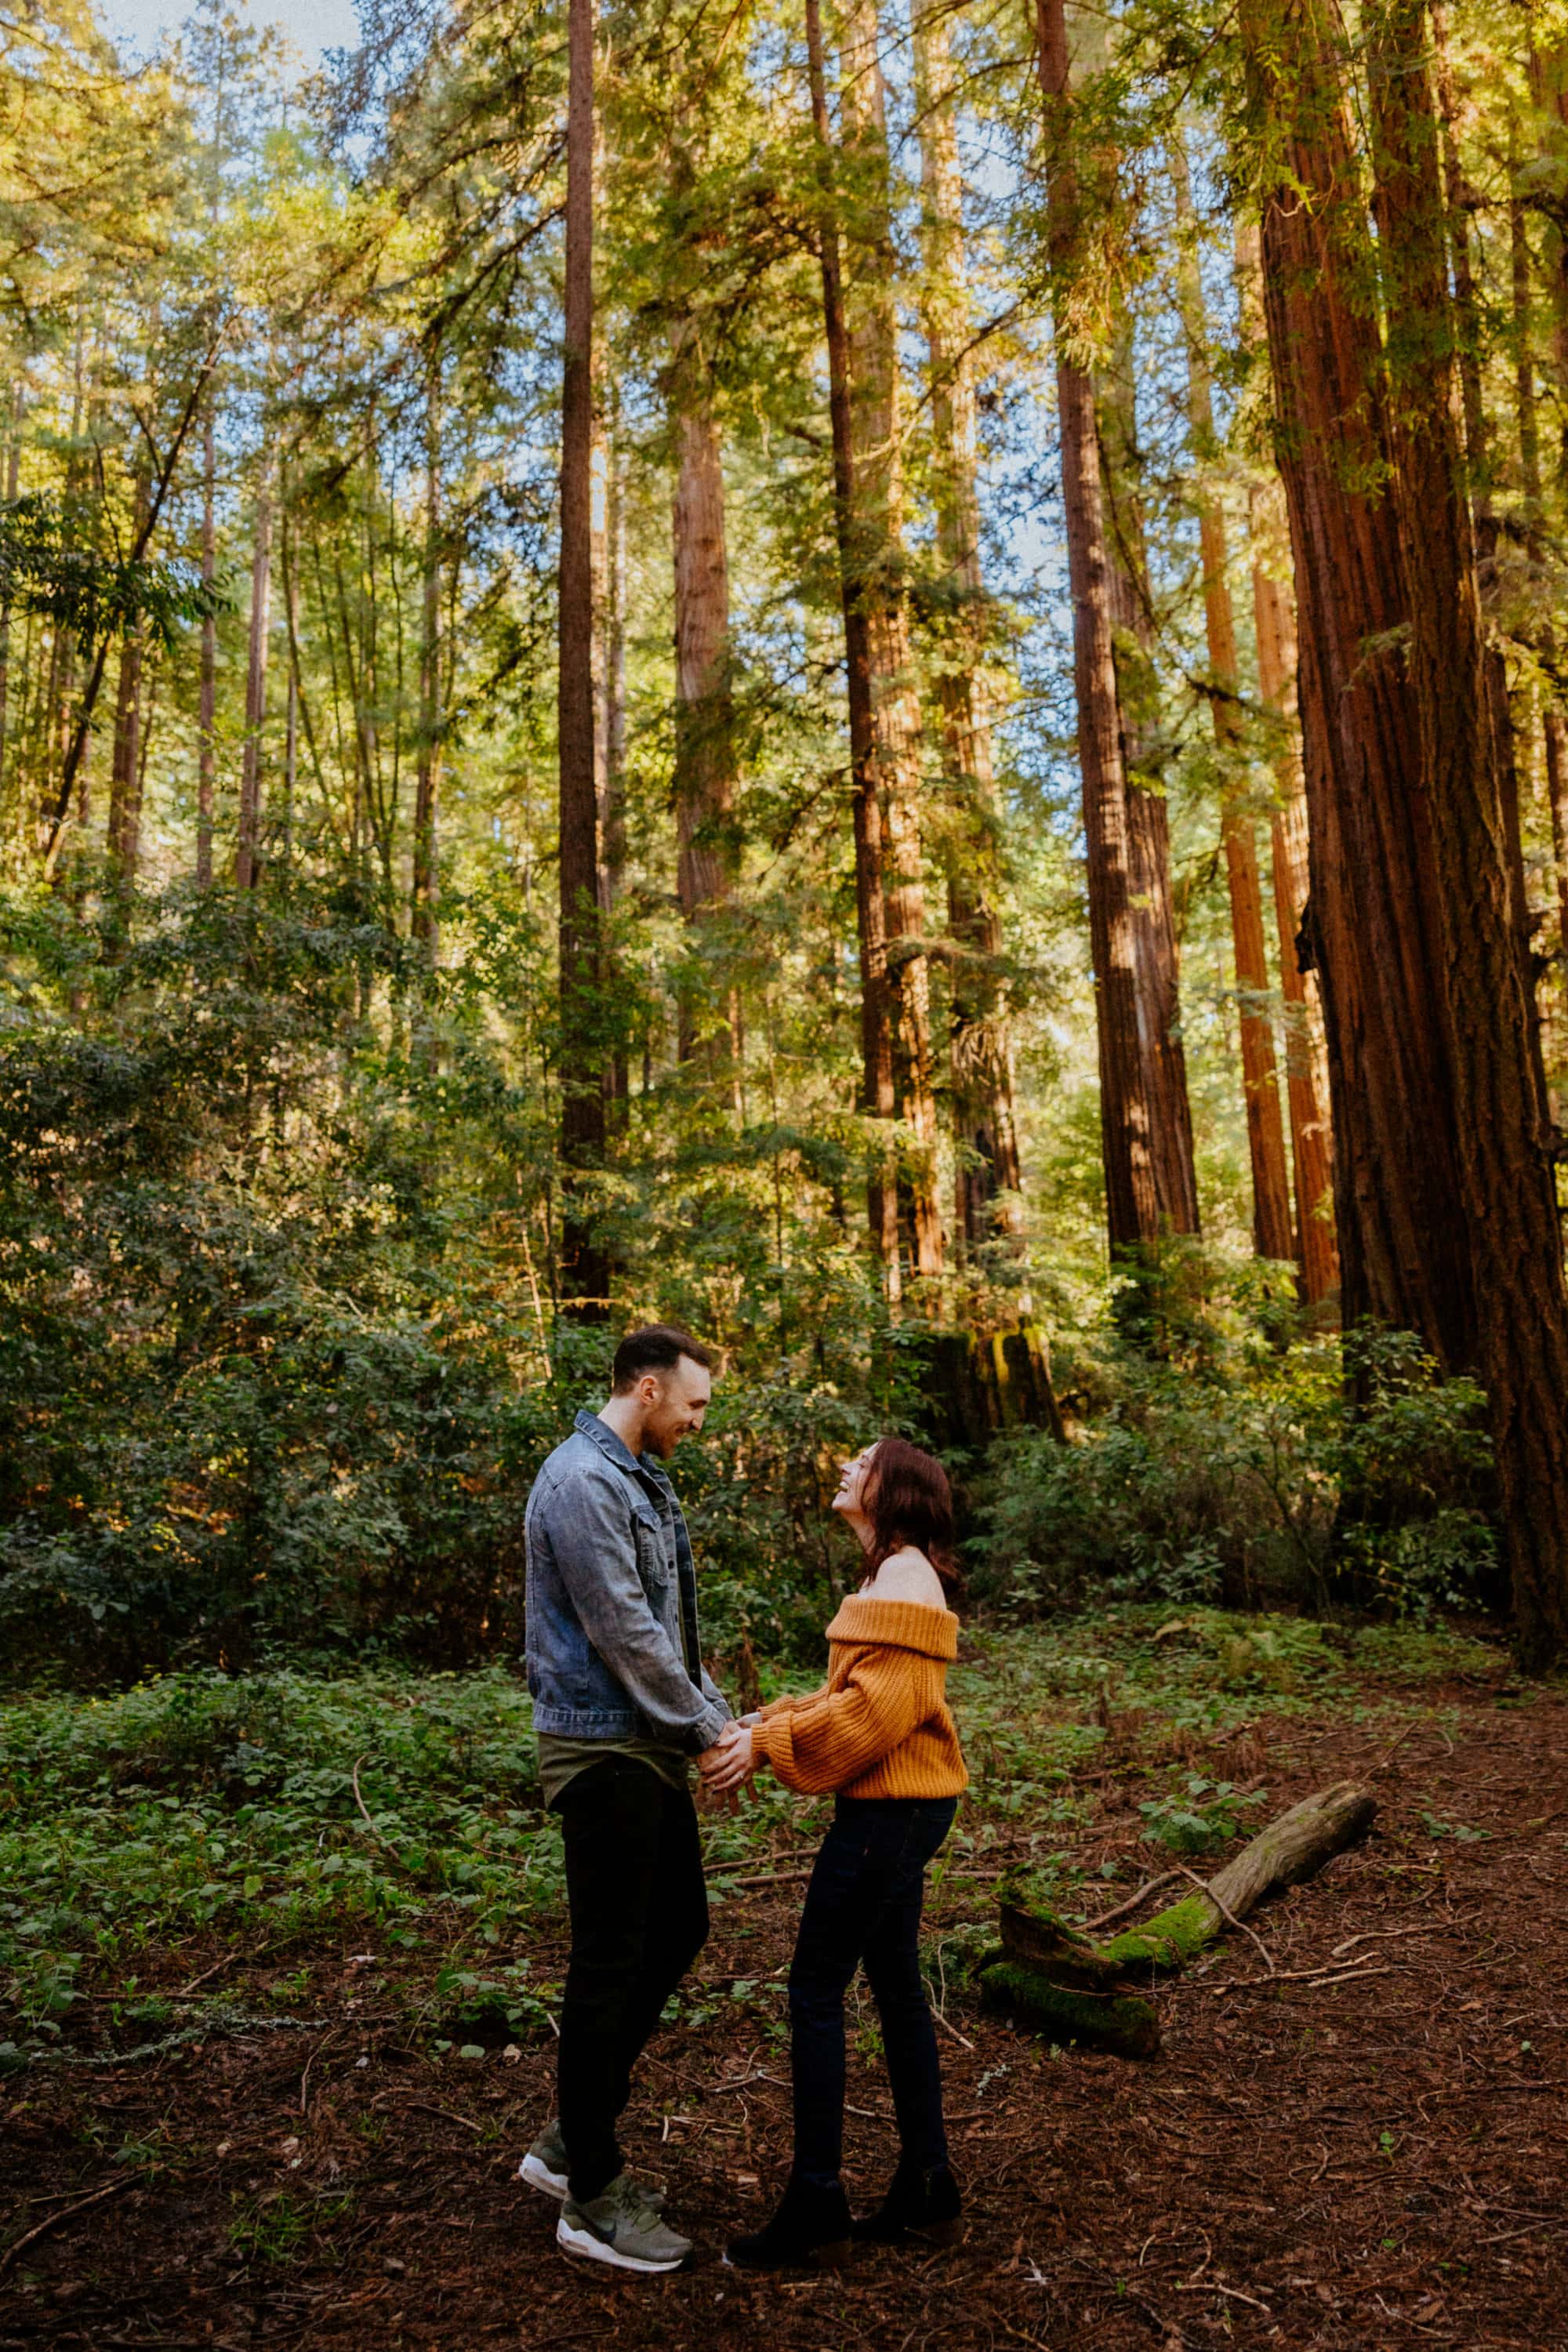 The couple standing in a serene meadow surrounded by majestic redwoods.